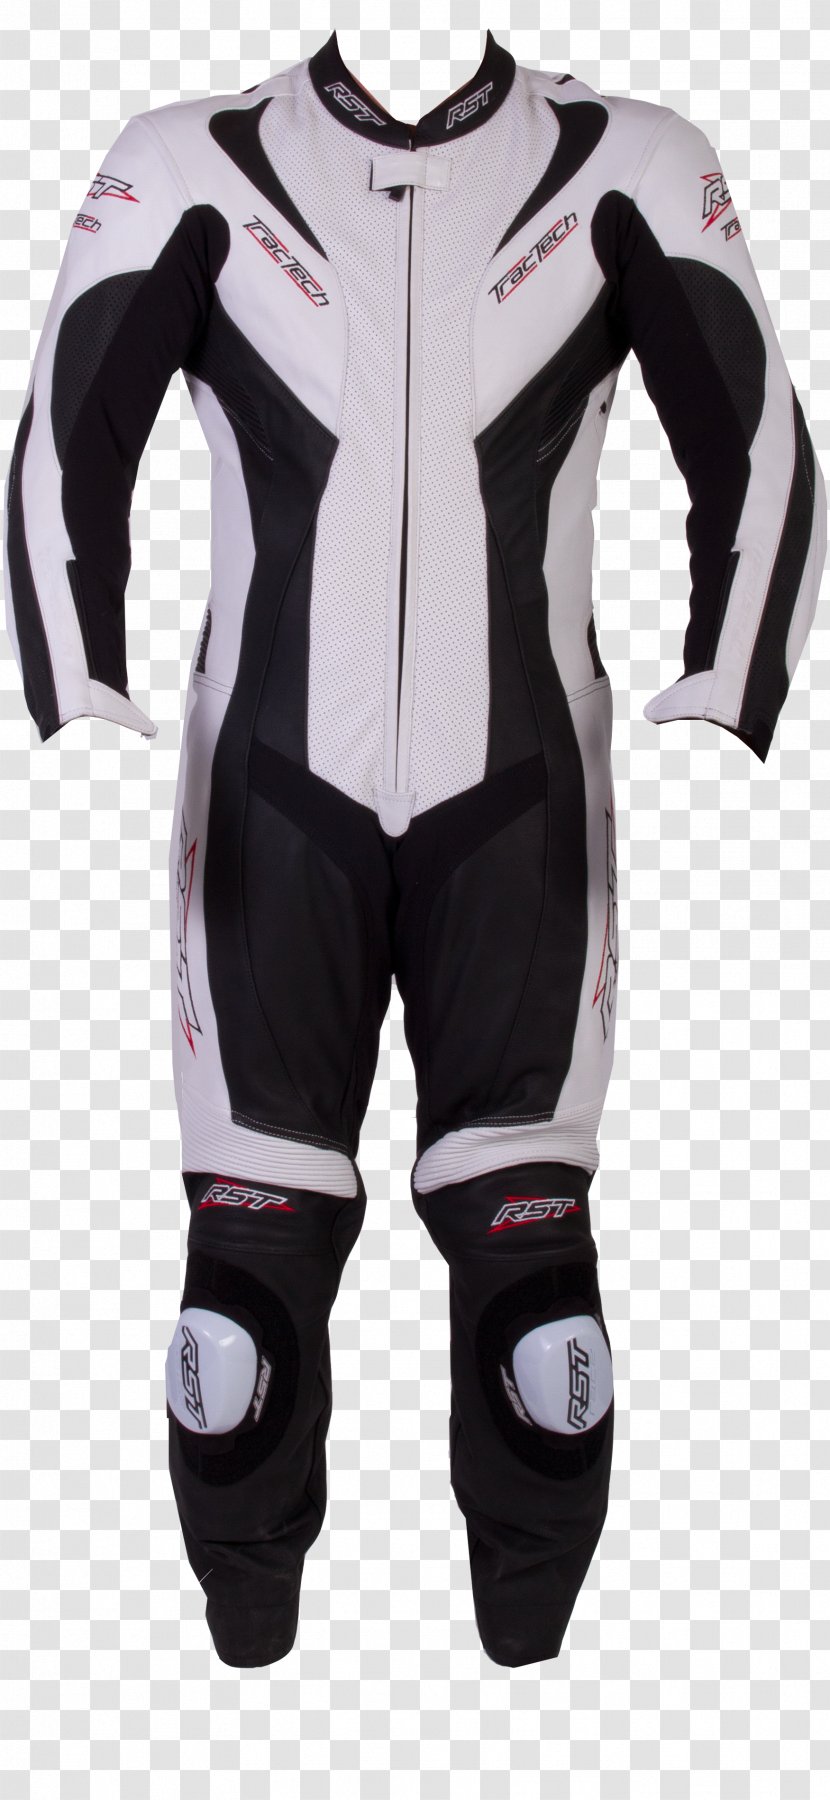 Motorcycle Bodysuit Jacket Clothing - Sportswear - Protective Transparent PNG